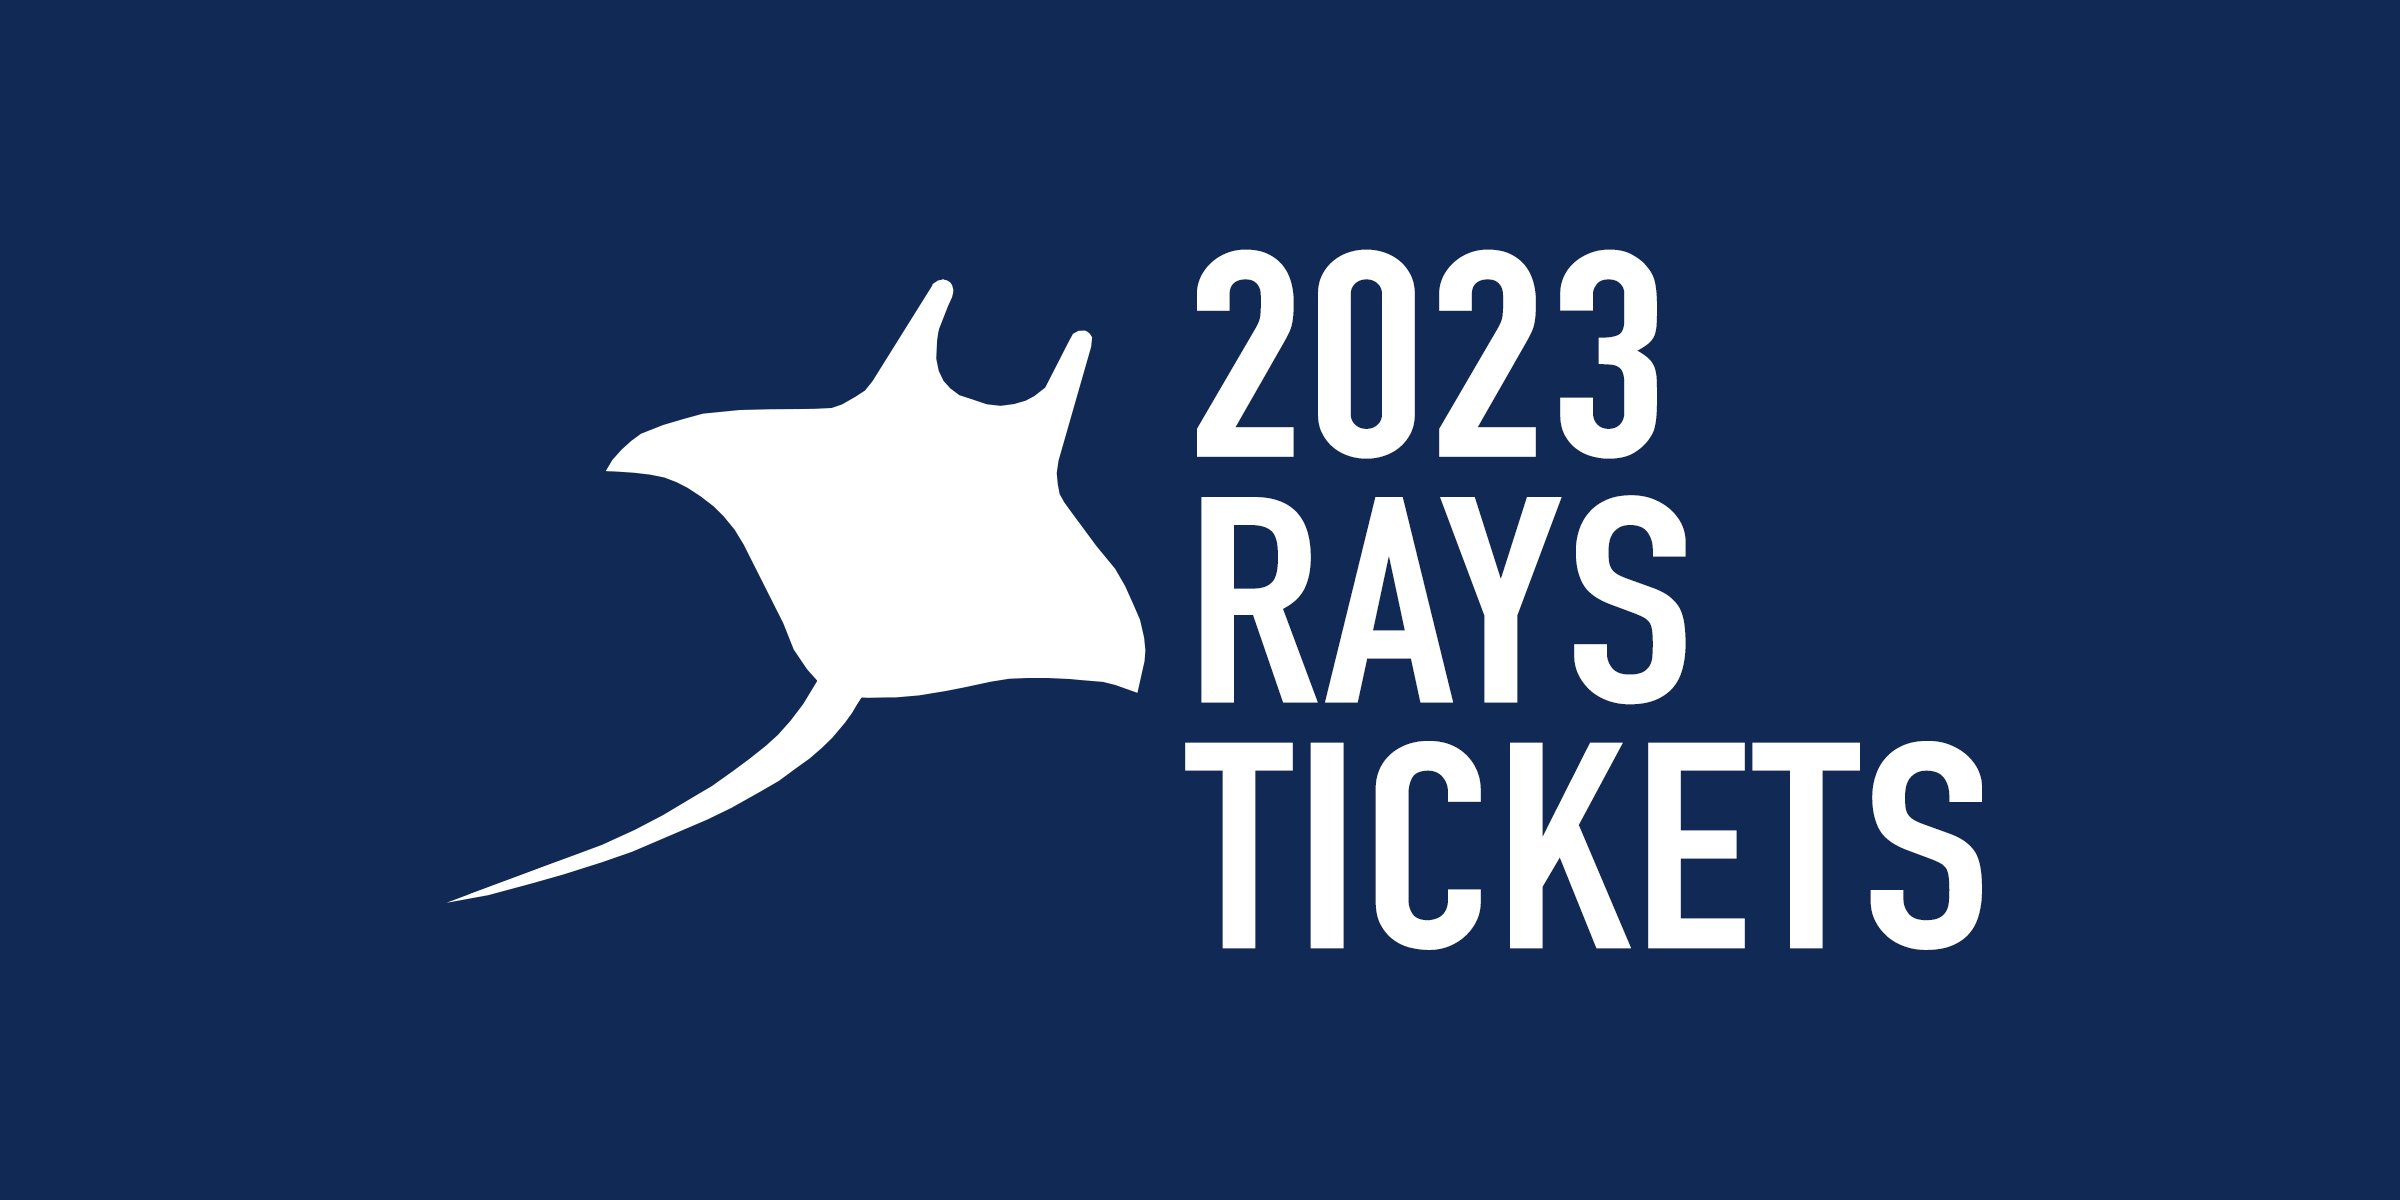 2023 Tampa Bay Rays Tickets